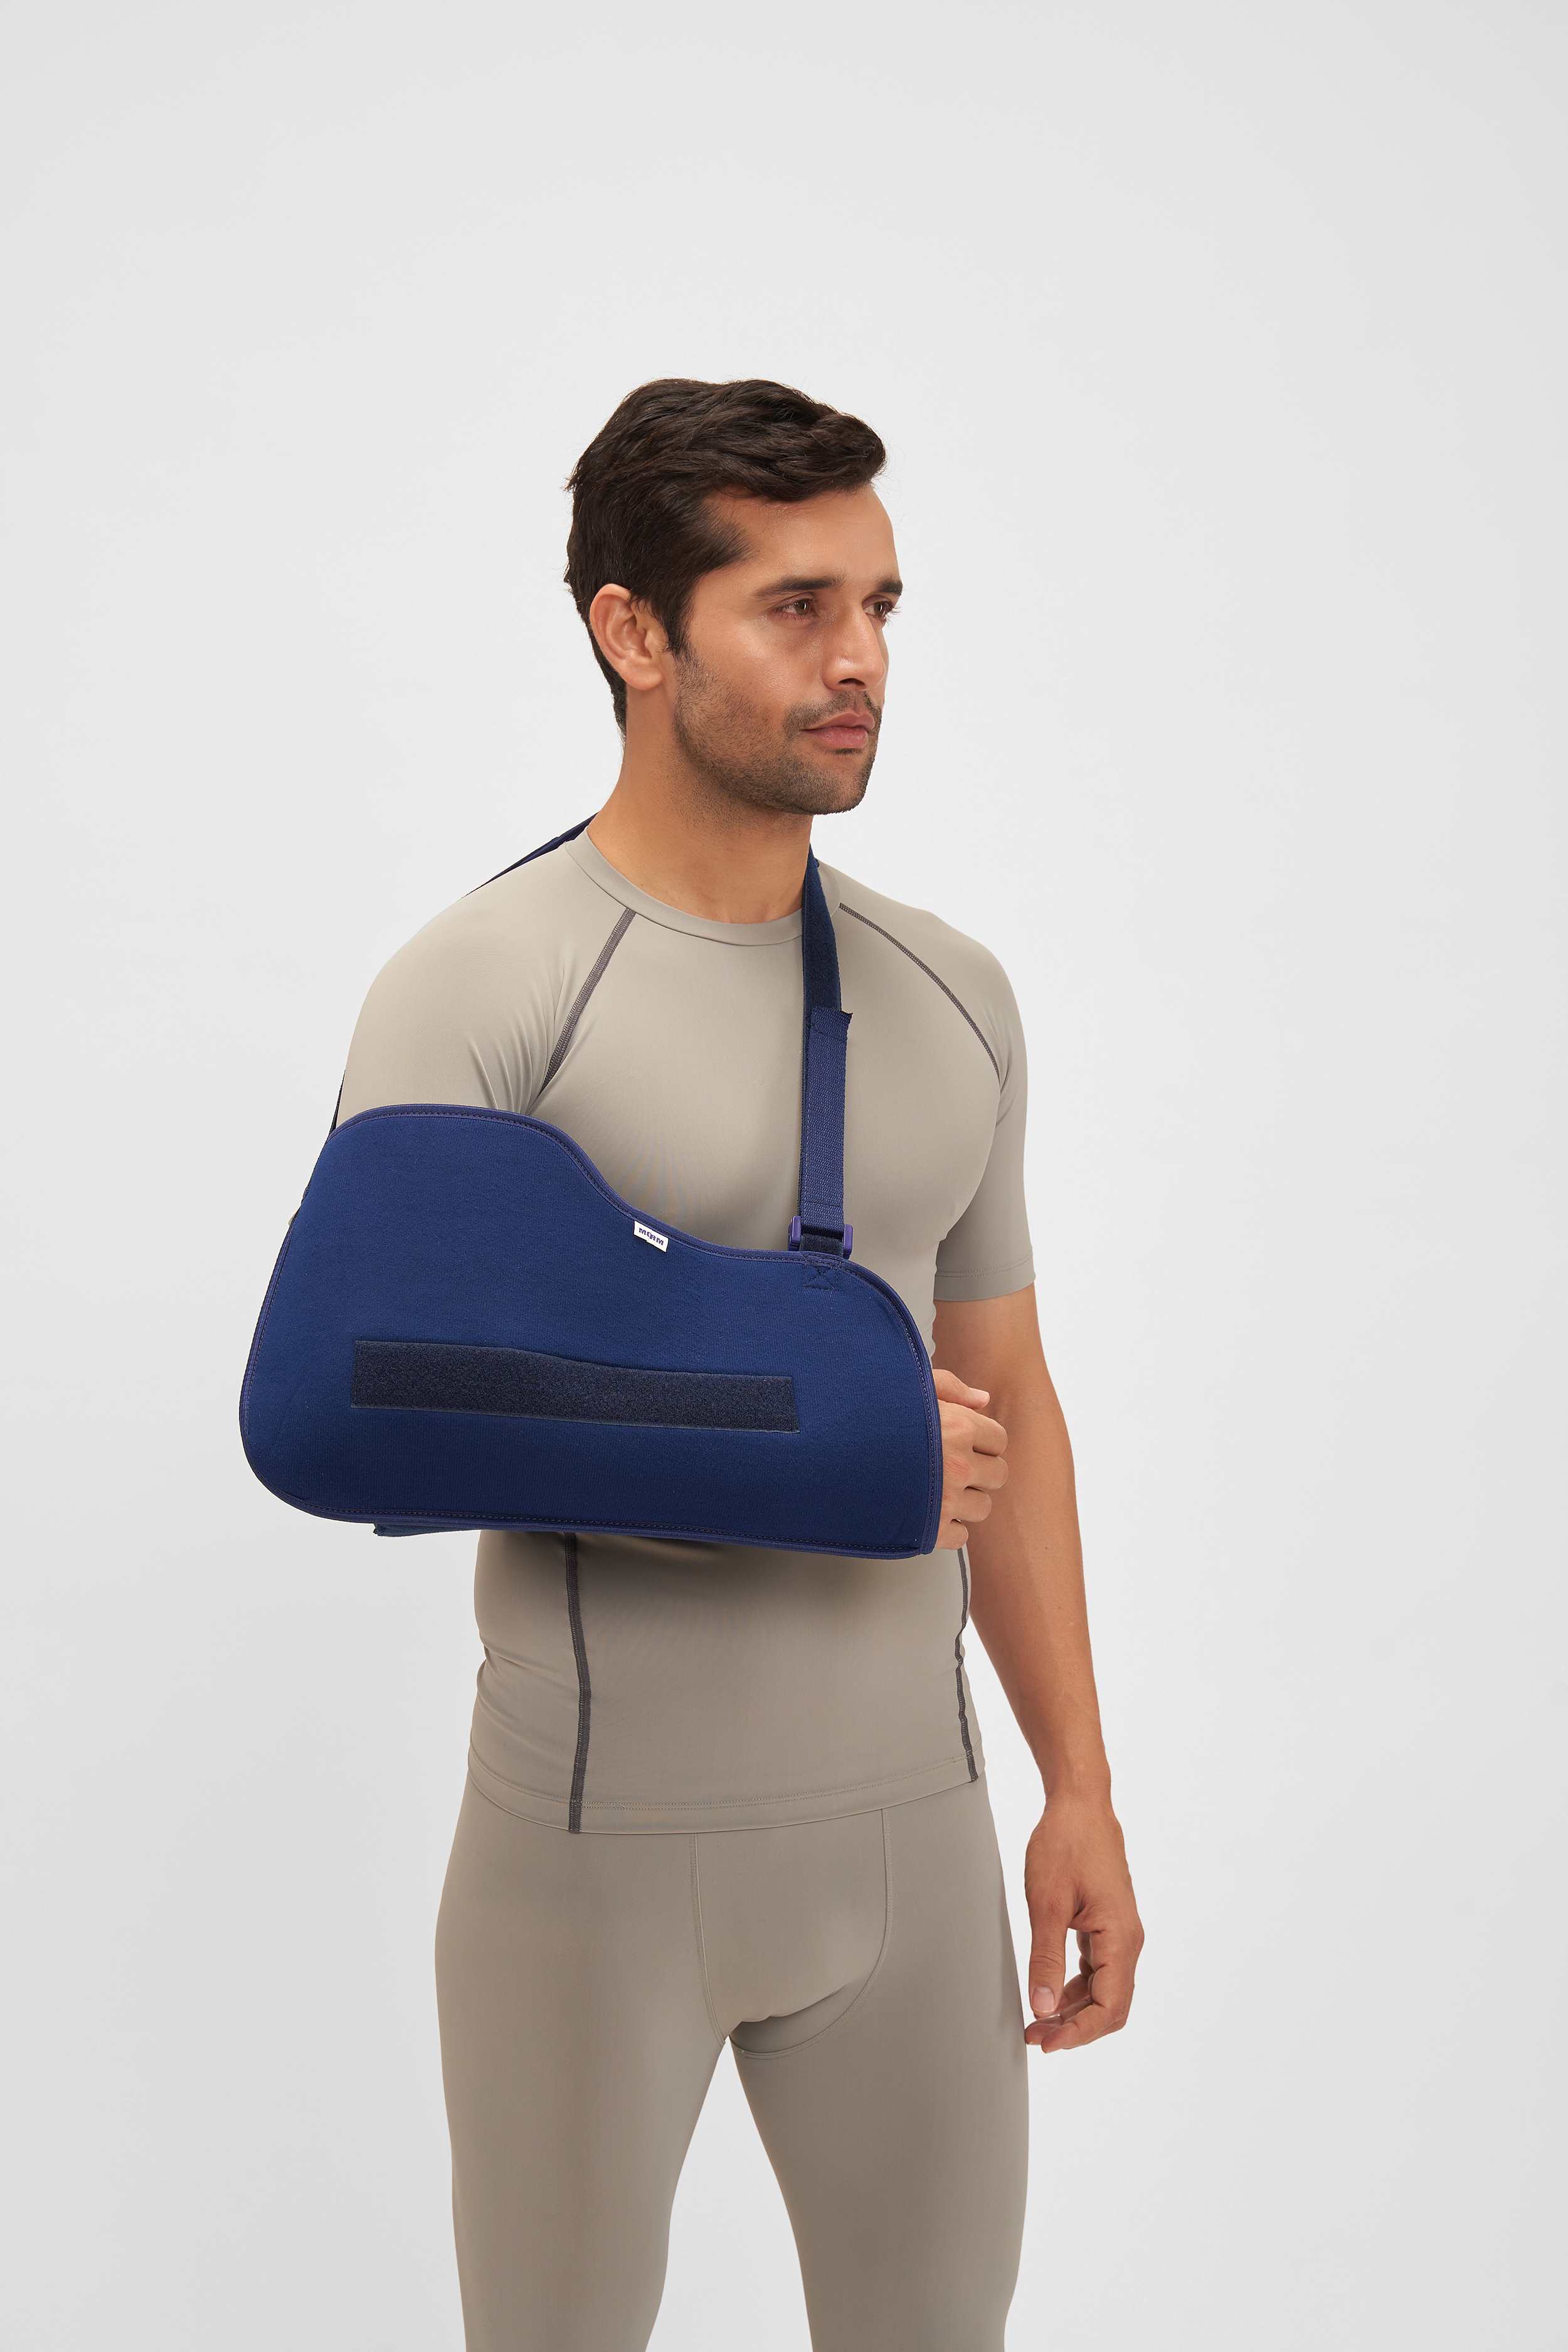 MGRM Arm Sling With Abduction Splint